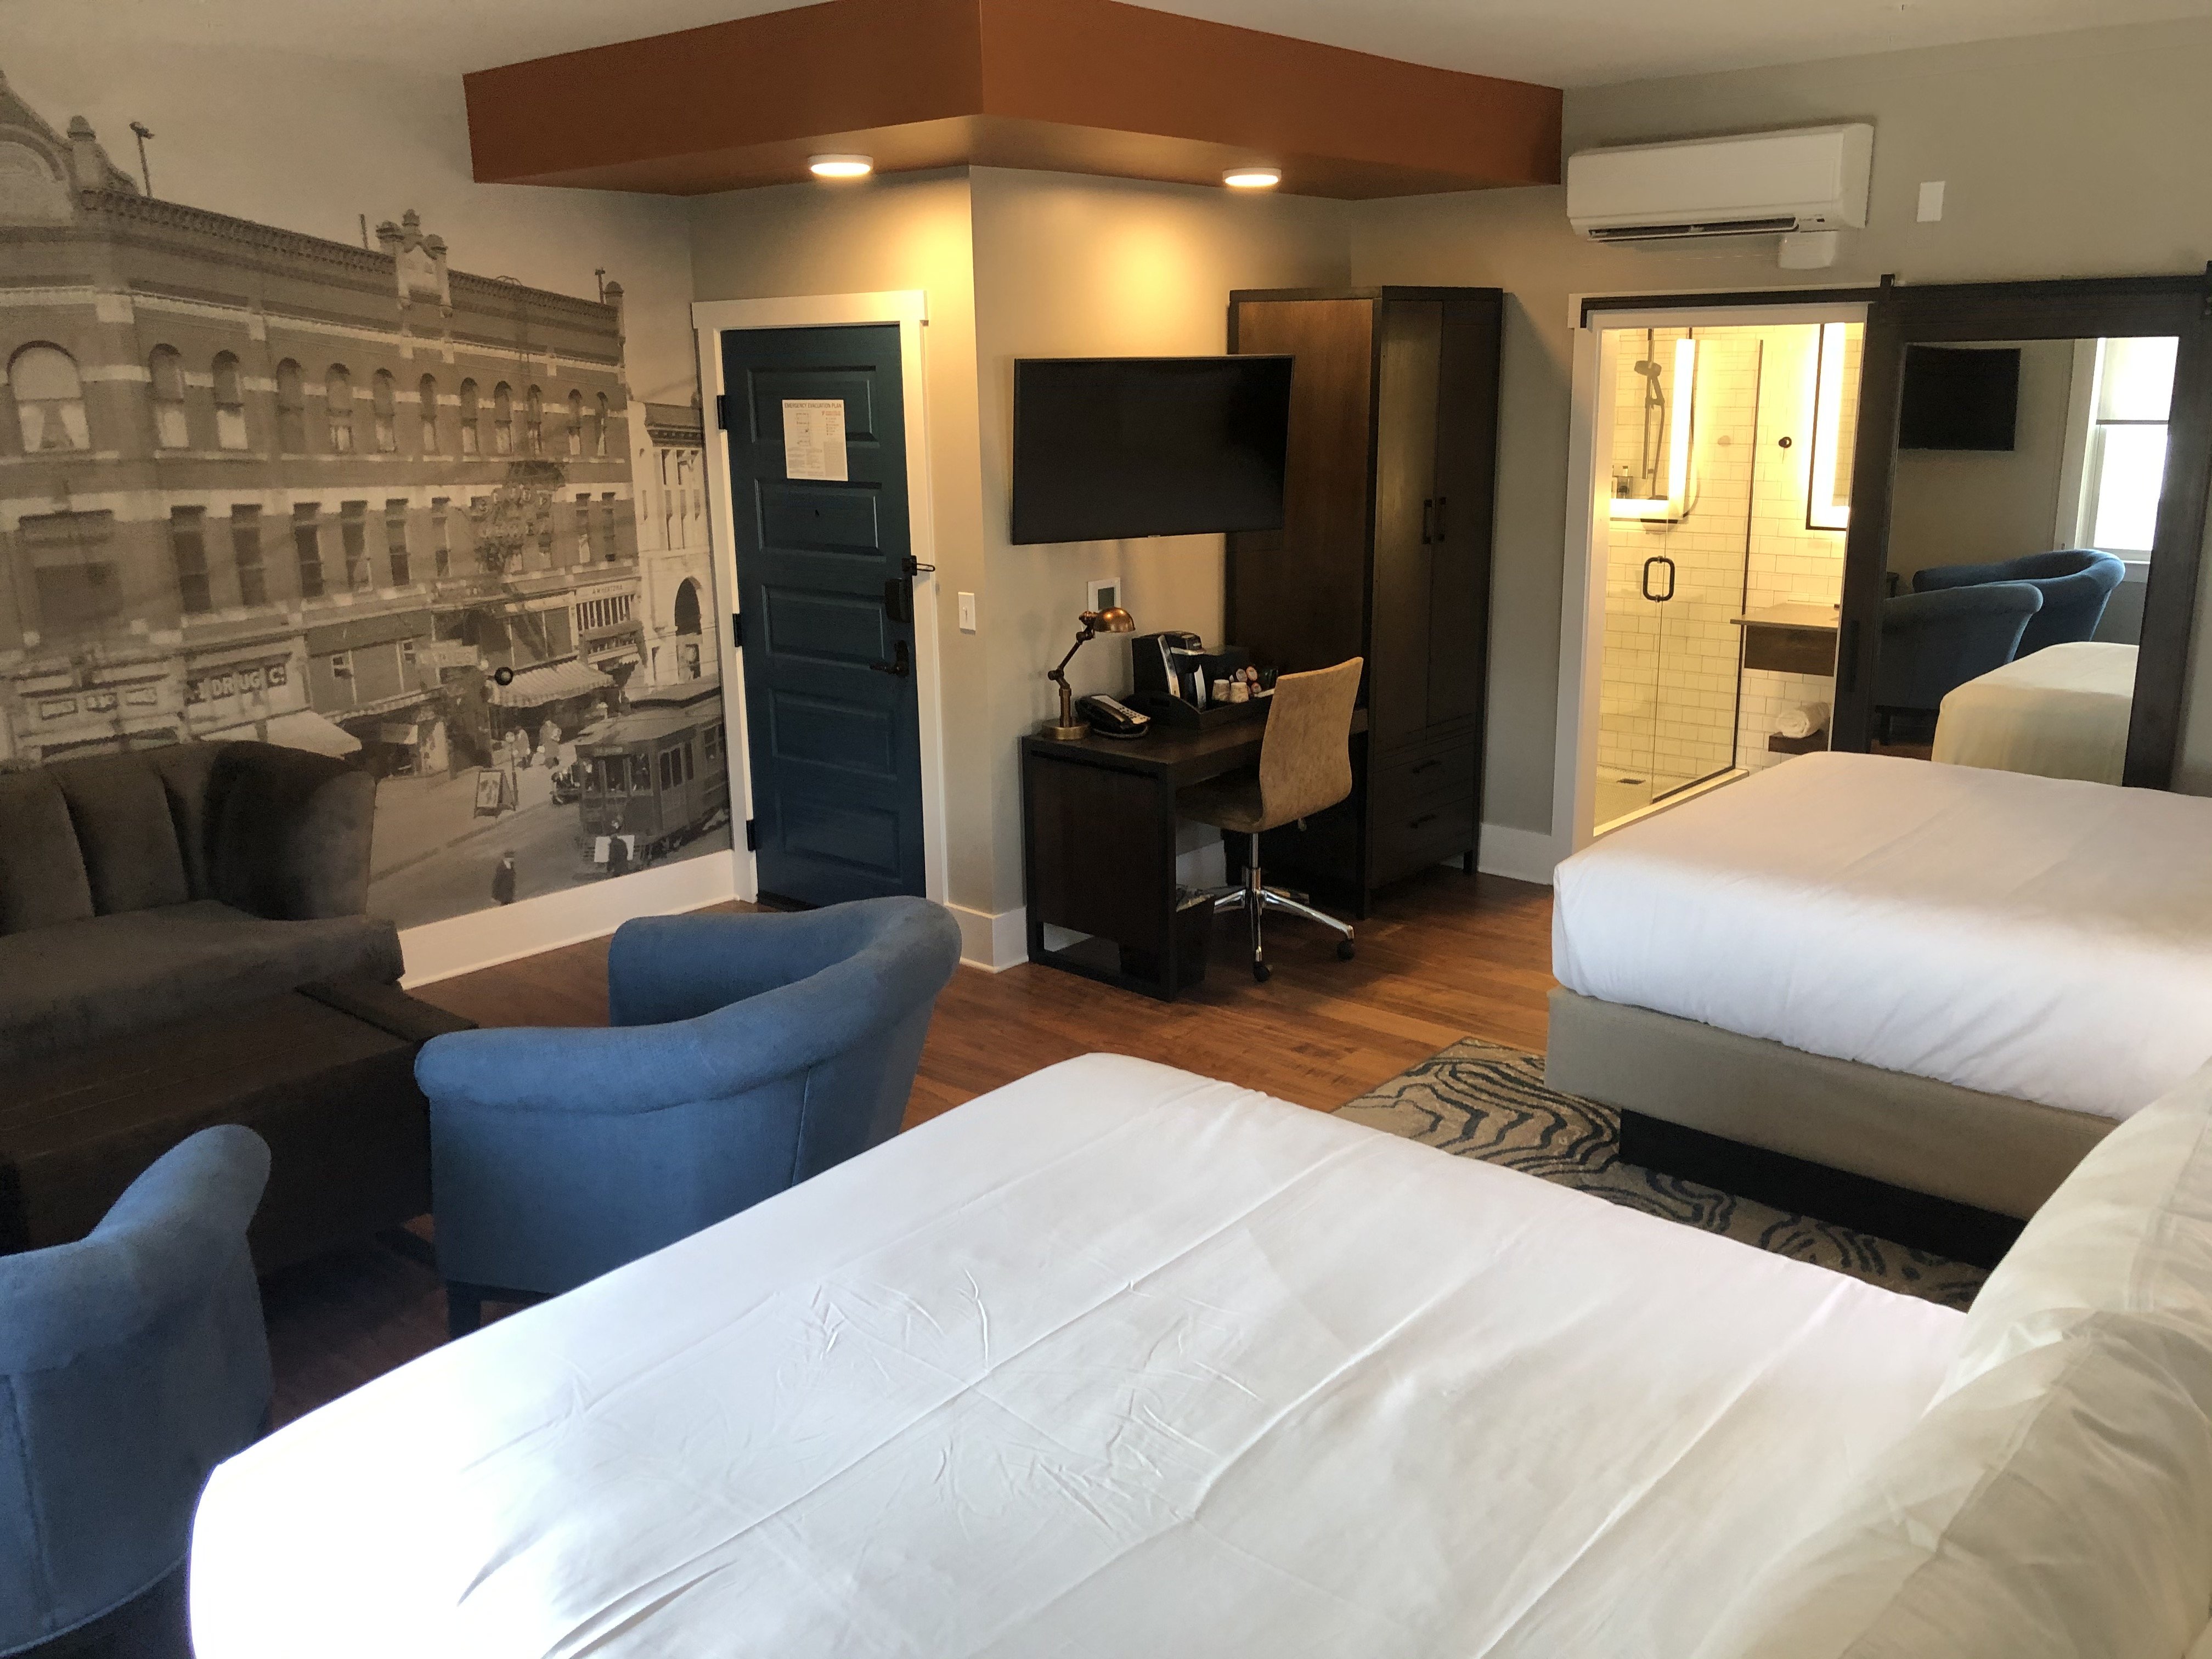 Sleep soundly in our deluxe room types at Hotel Indigo downtown